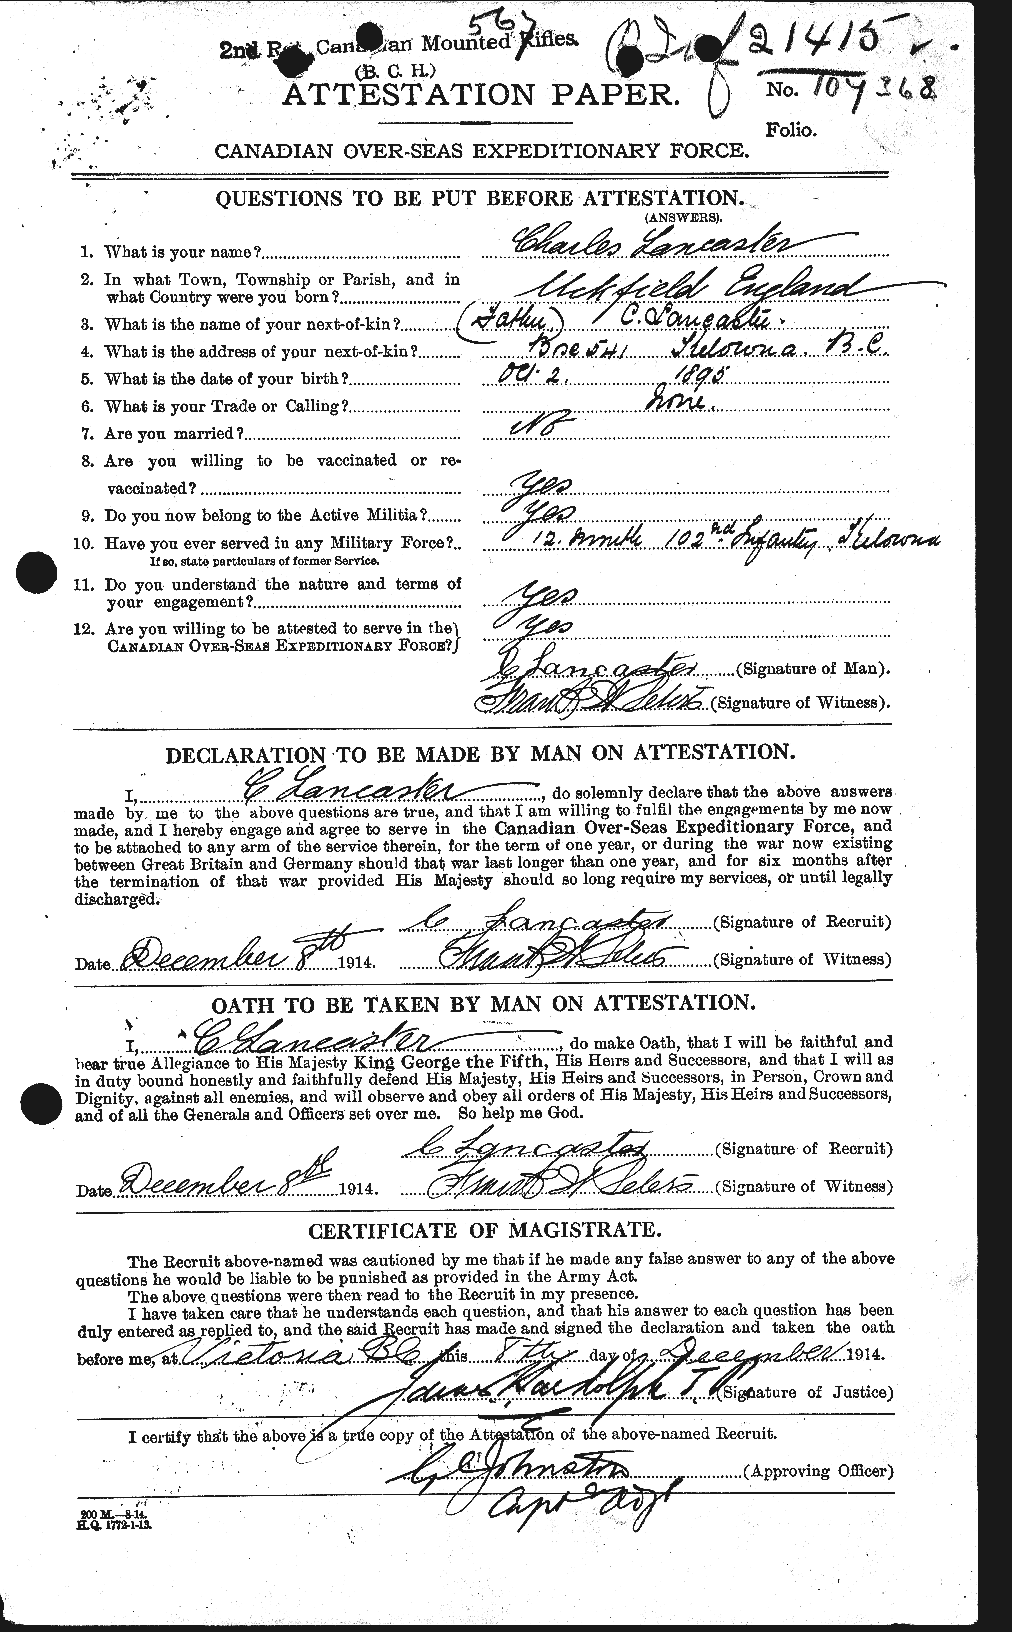 Personnel Records of the First World War - CEF 448346a